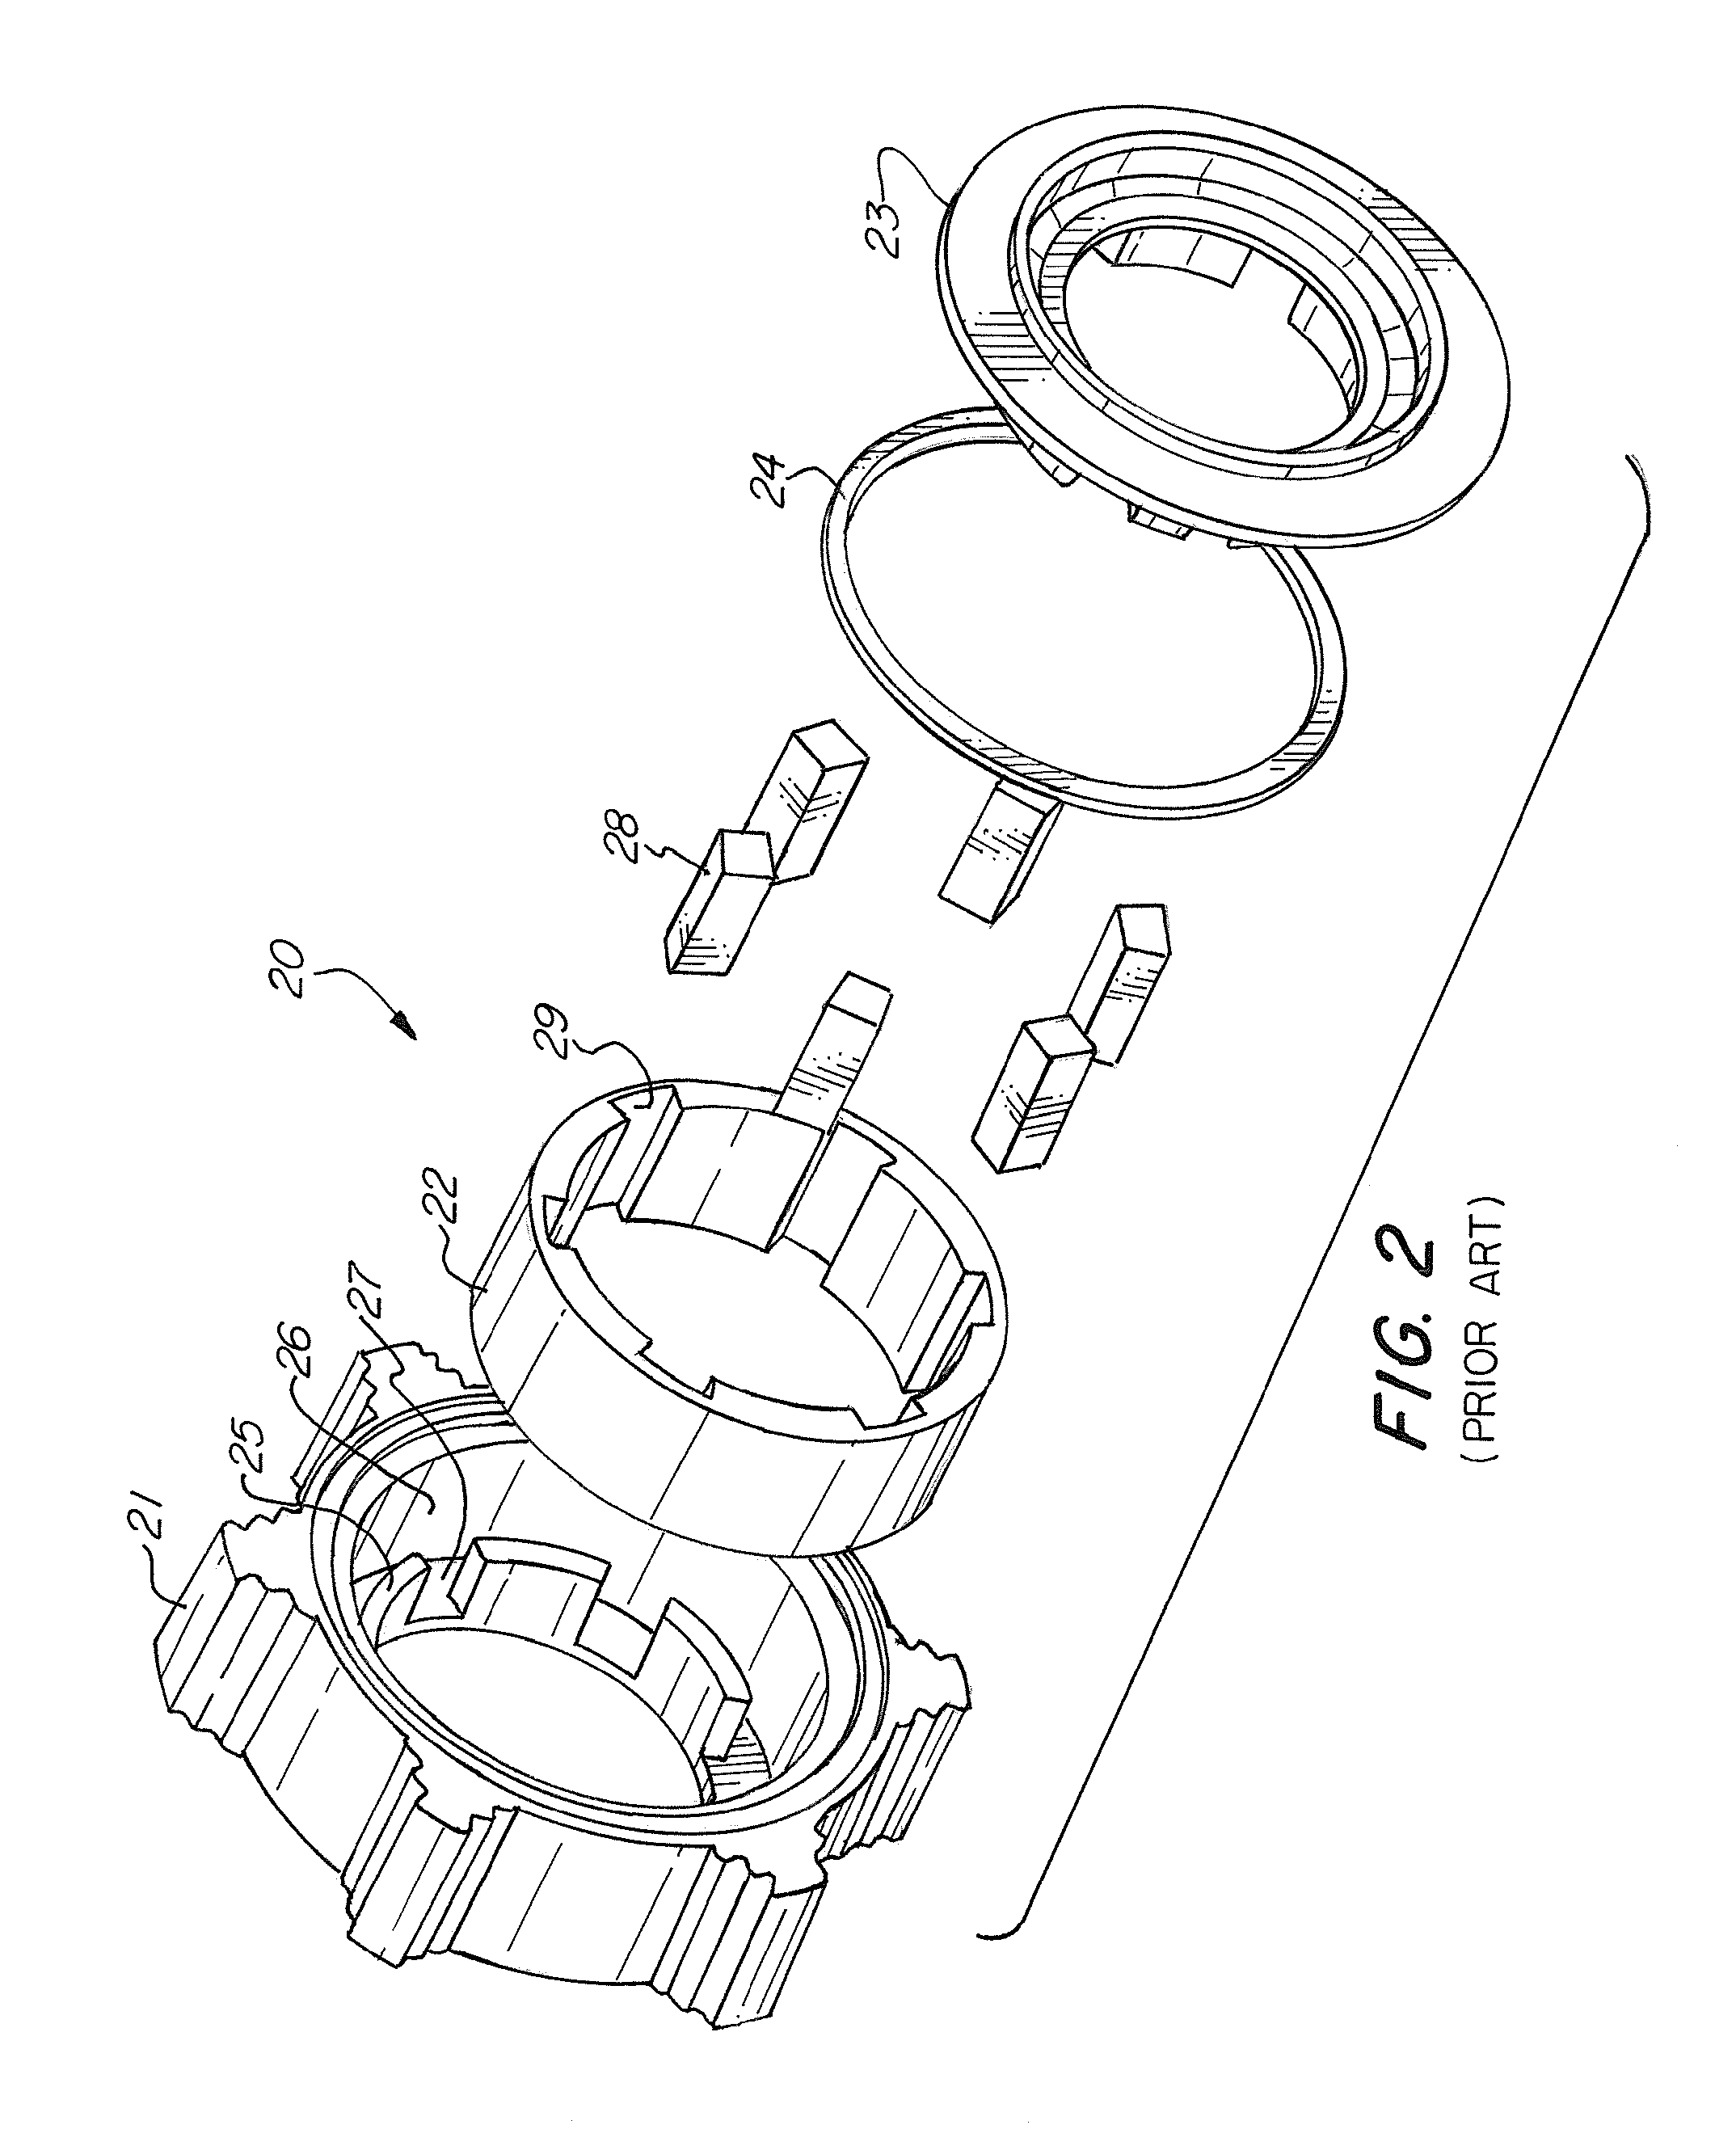 Polymeric Material For Use In And With Sterilizable Medical Devices